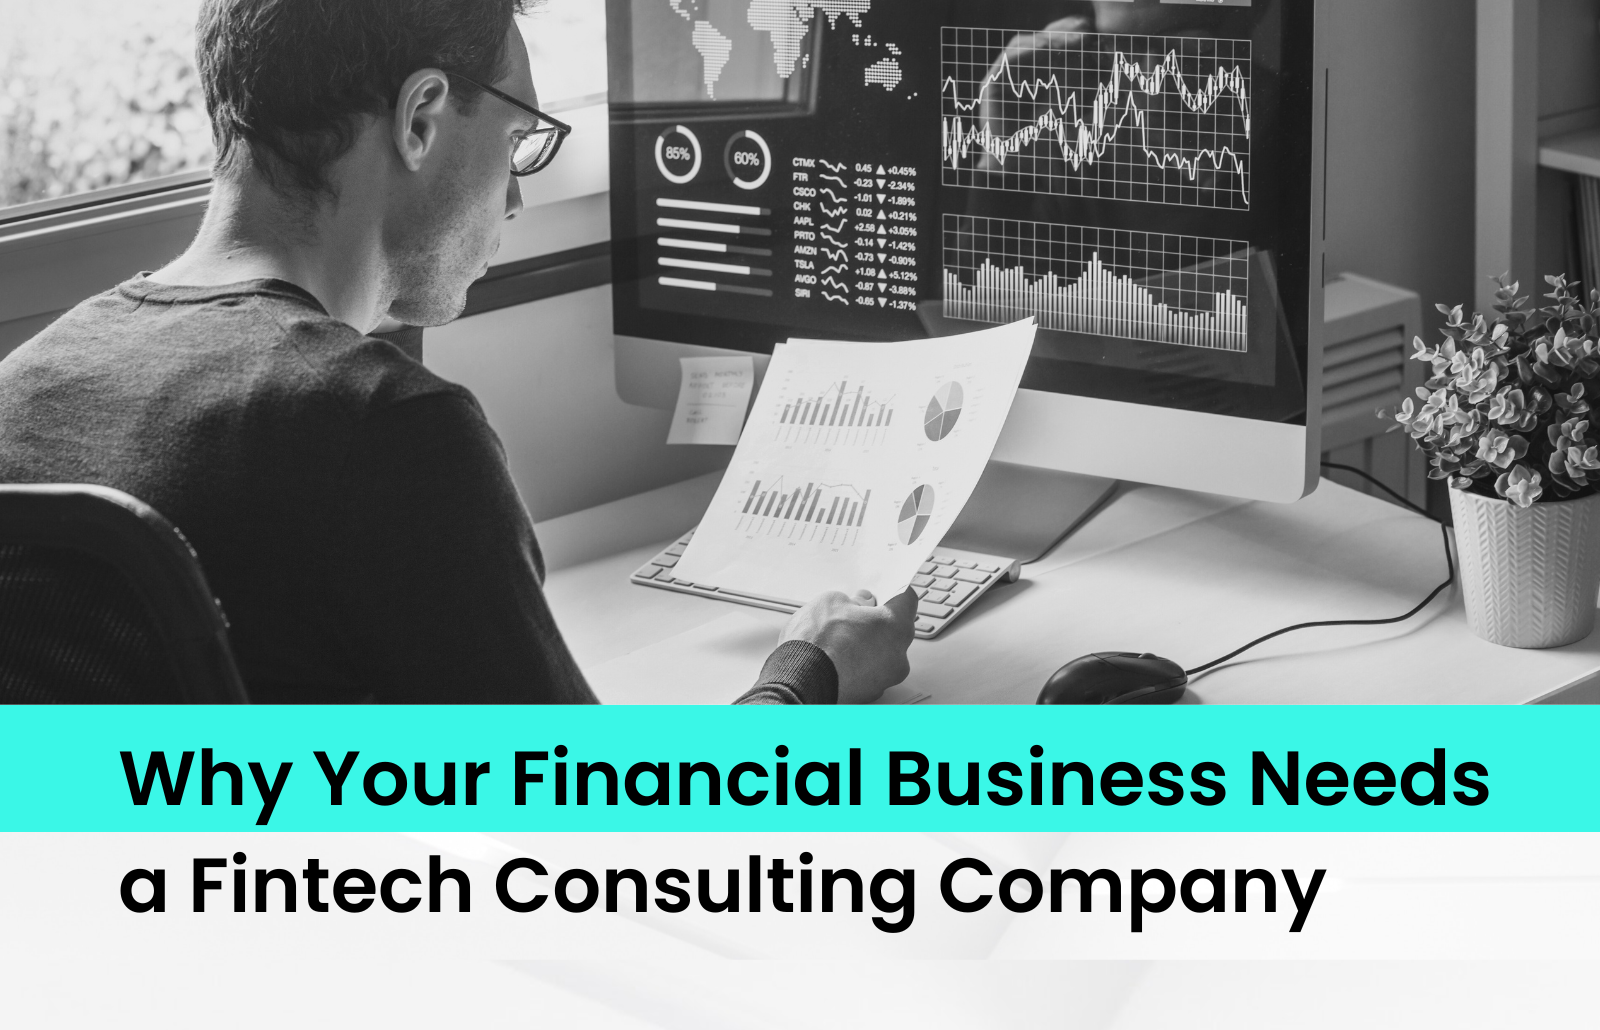 Why Your Financial Business Needs a Fintech Consulting Company